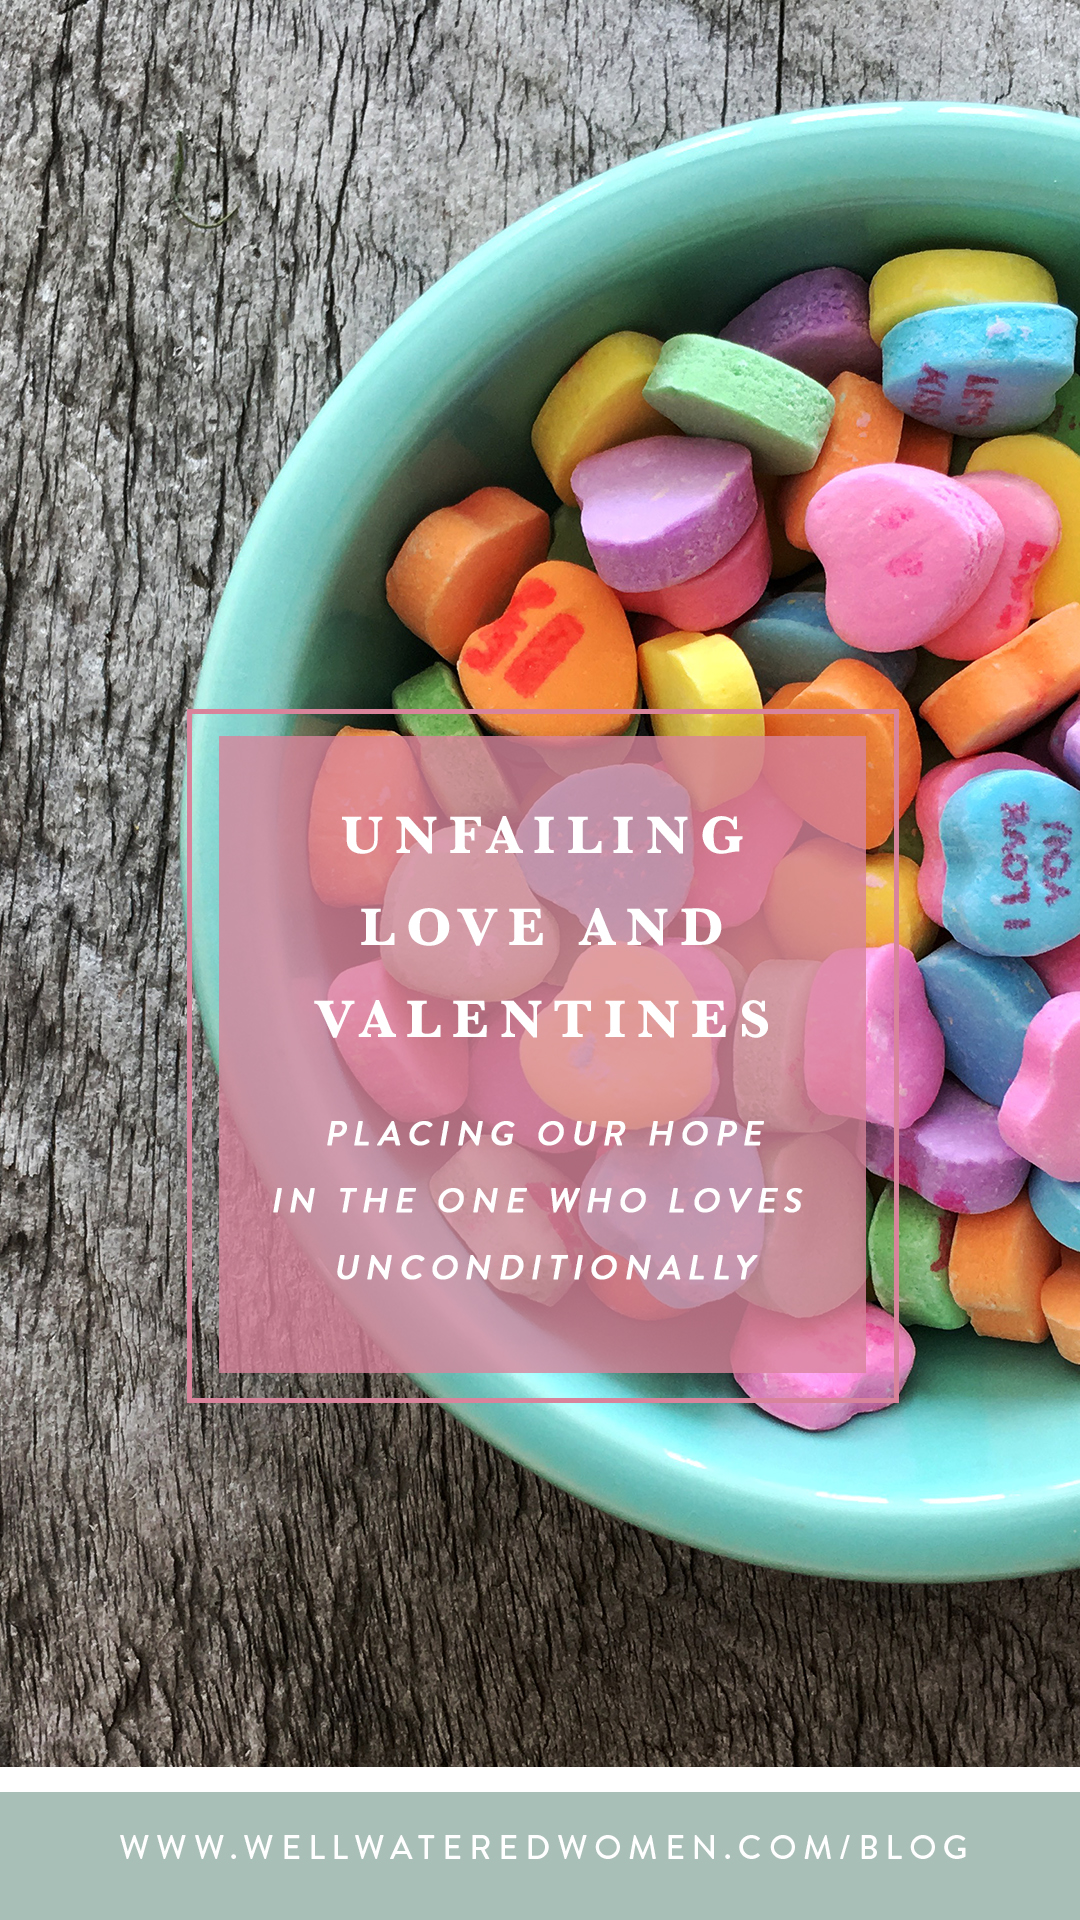 An Unfailing Love: Placing Our Hope in the One Who Loves Unconditionally (Encouragement for Valentine's Day)